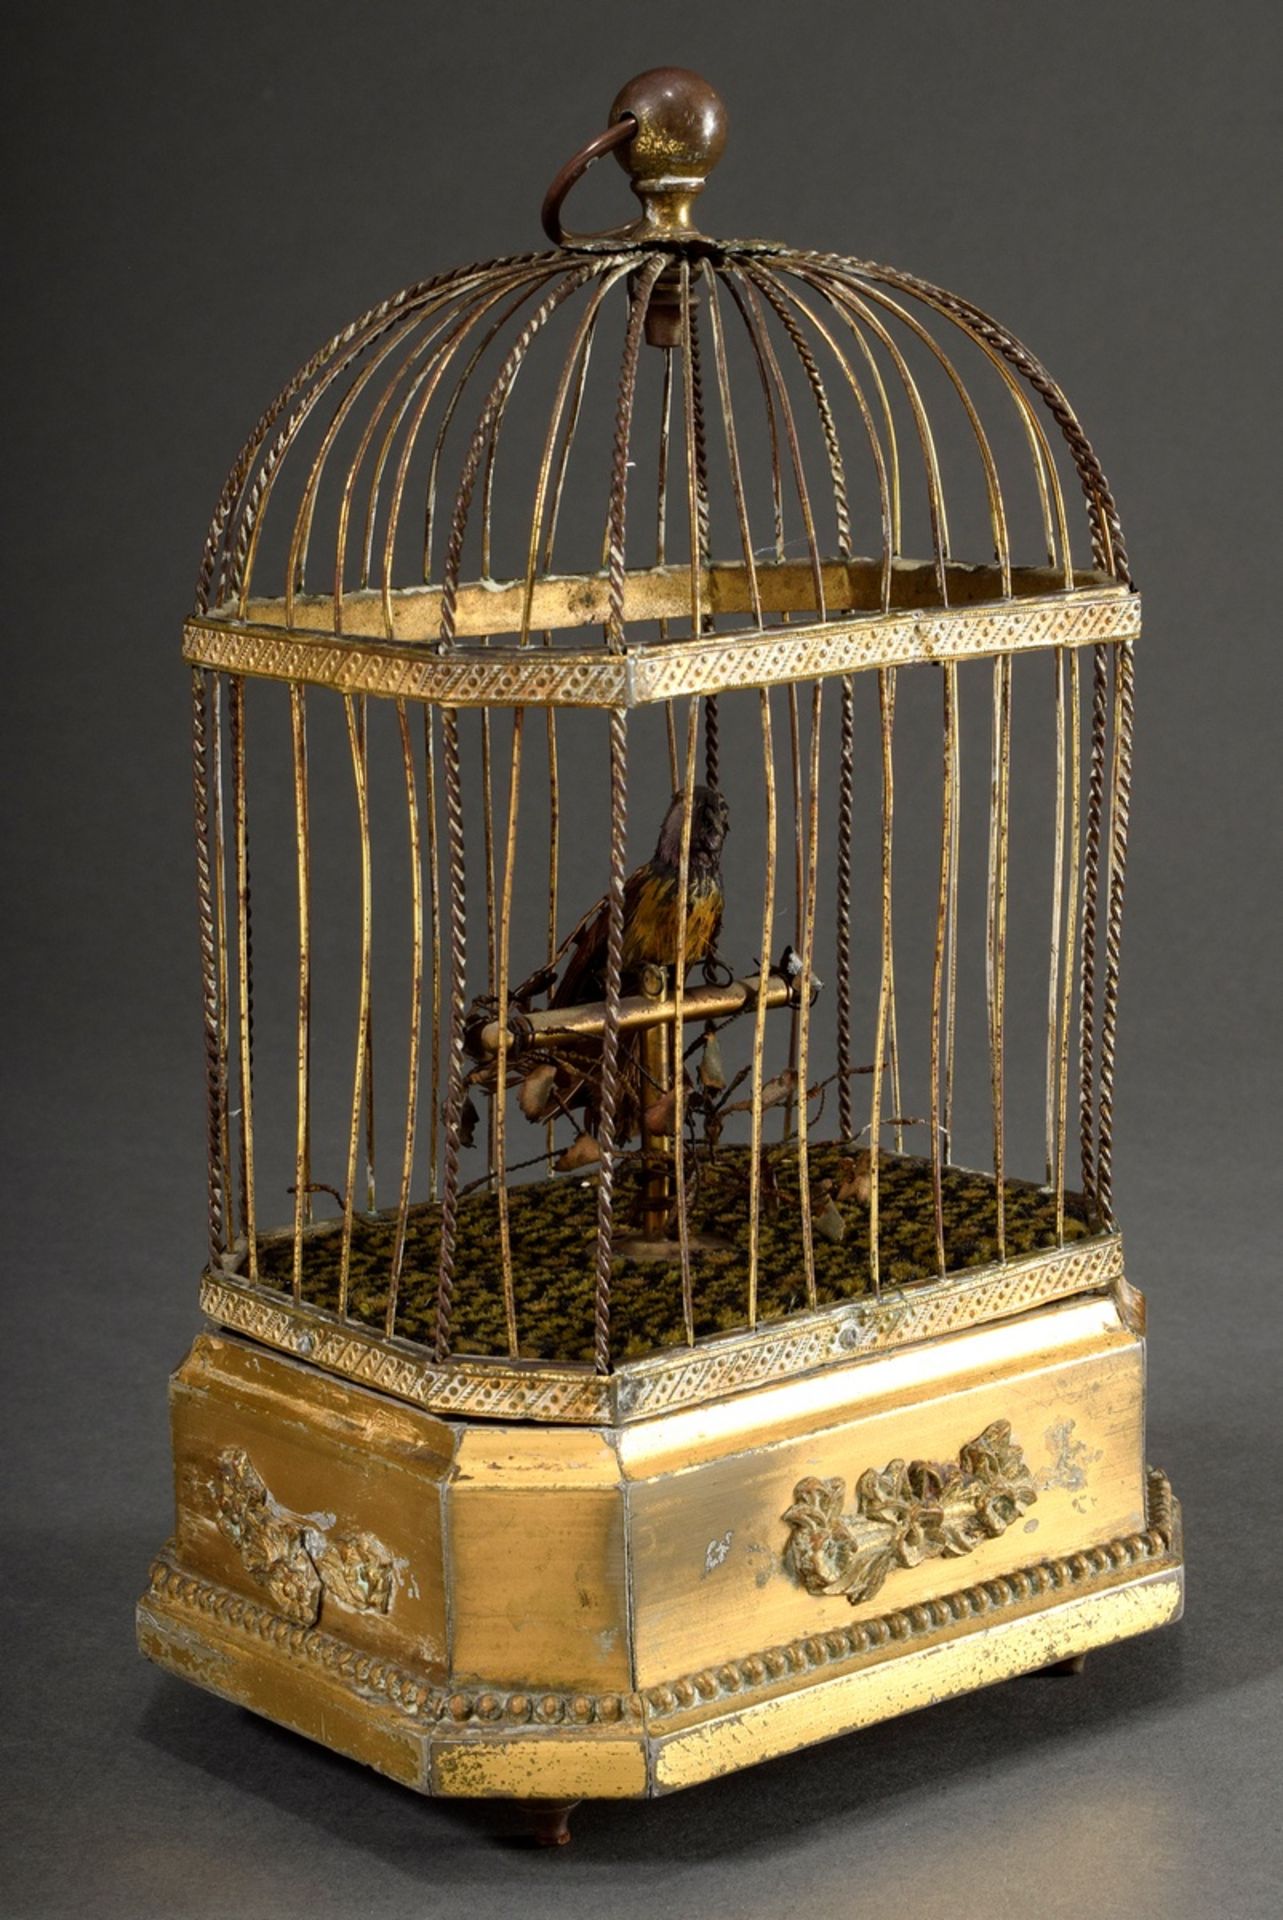 Singing bird automaton with small feathered bird on rod in brass wire cage on gilded wood base with